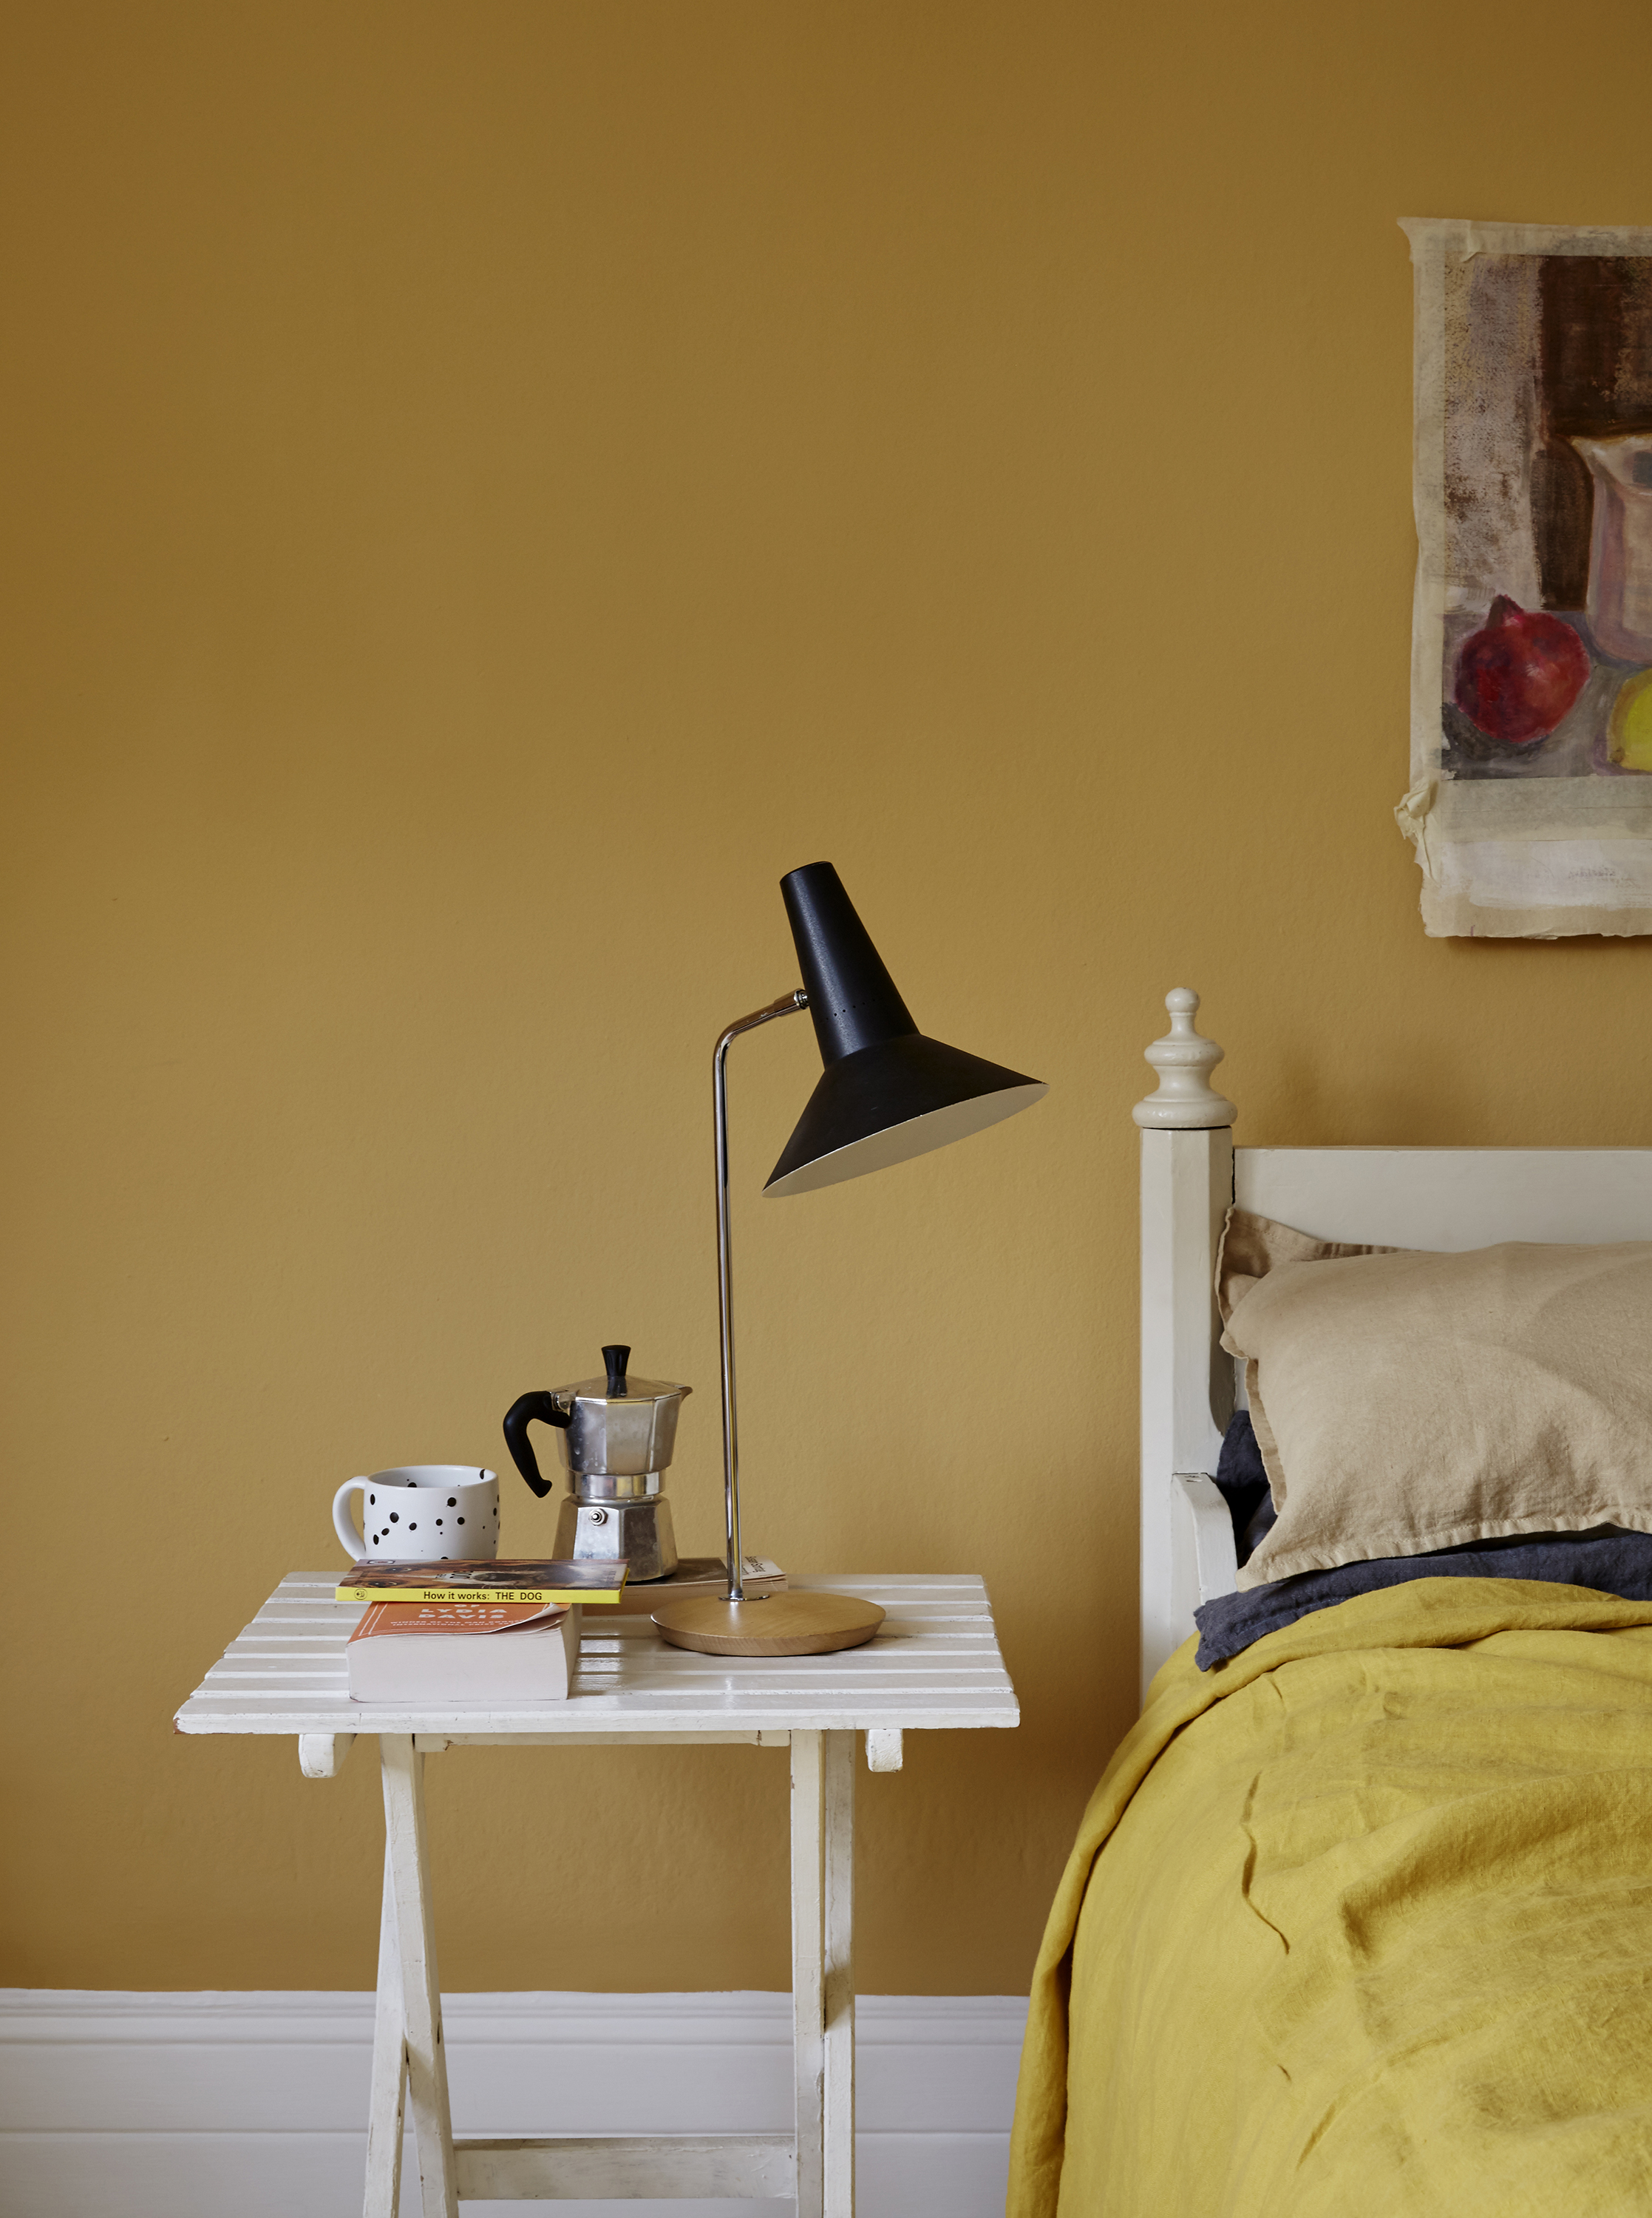 A Mustard yellow bedroom using paint shade 'Humpty Dumpty' by Earthborn on walls